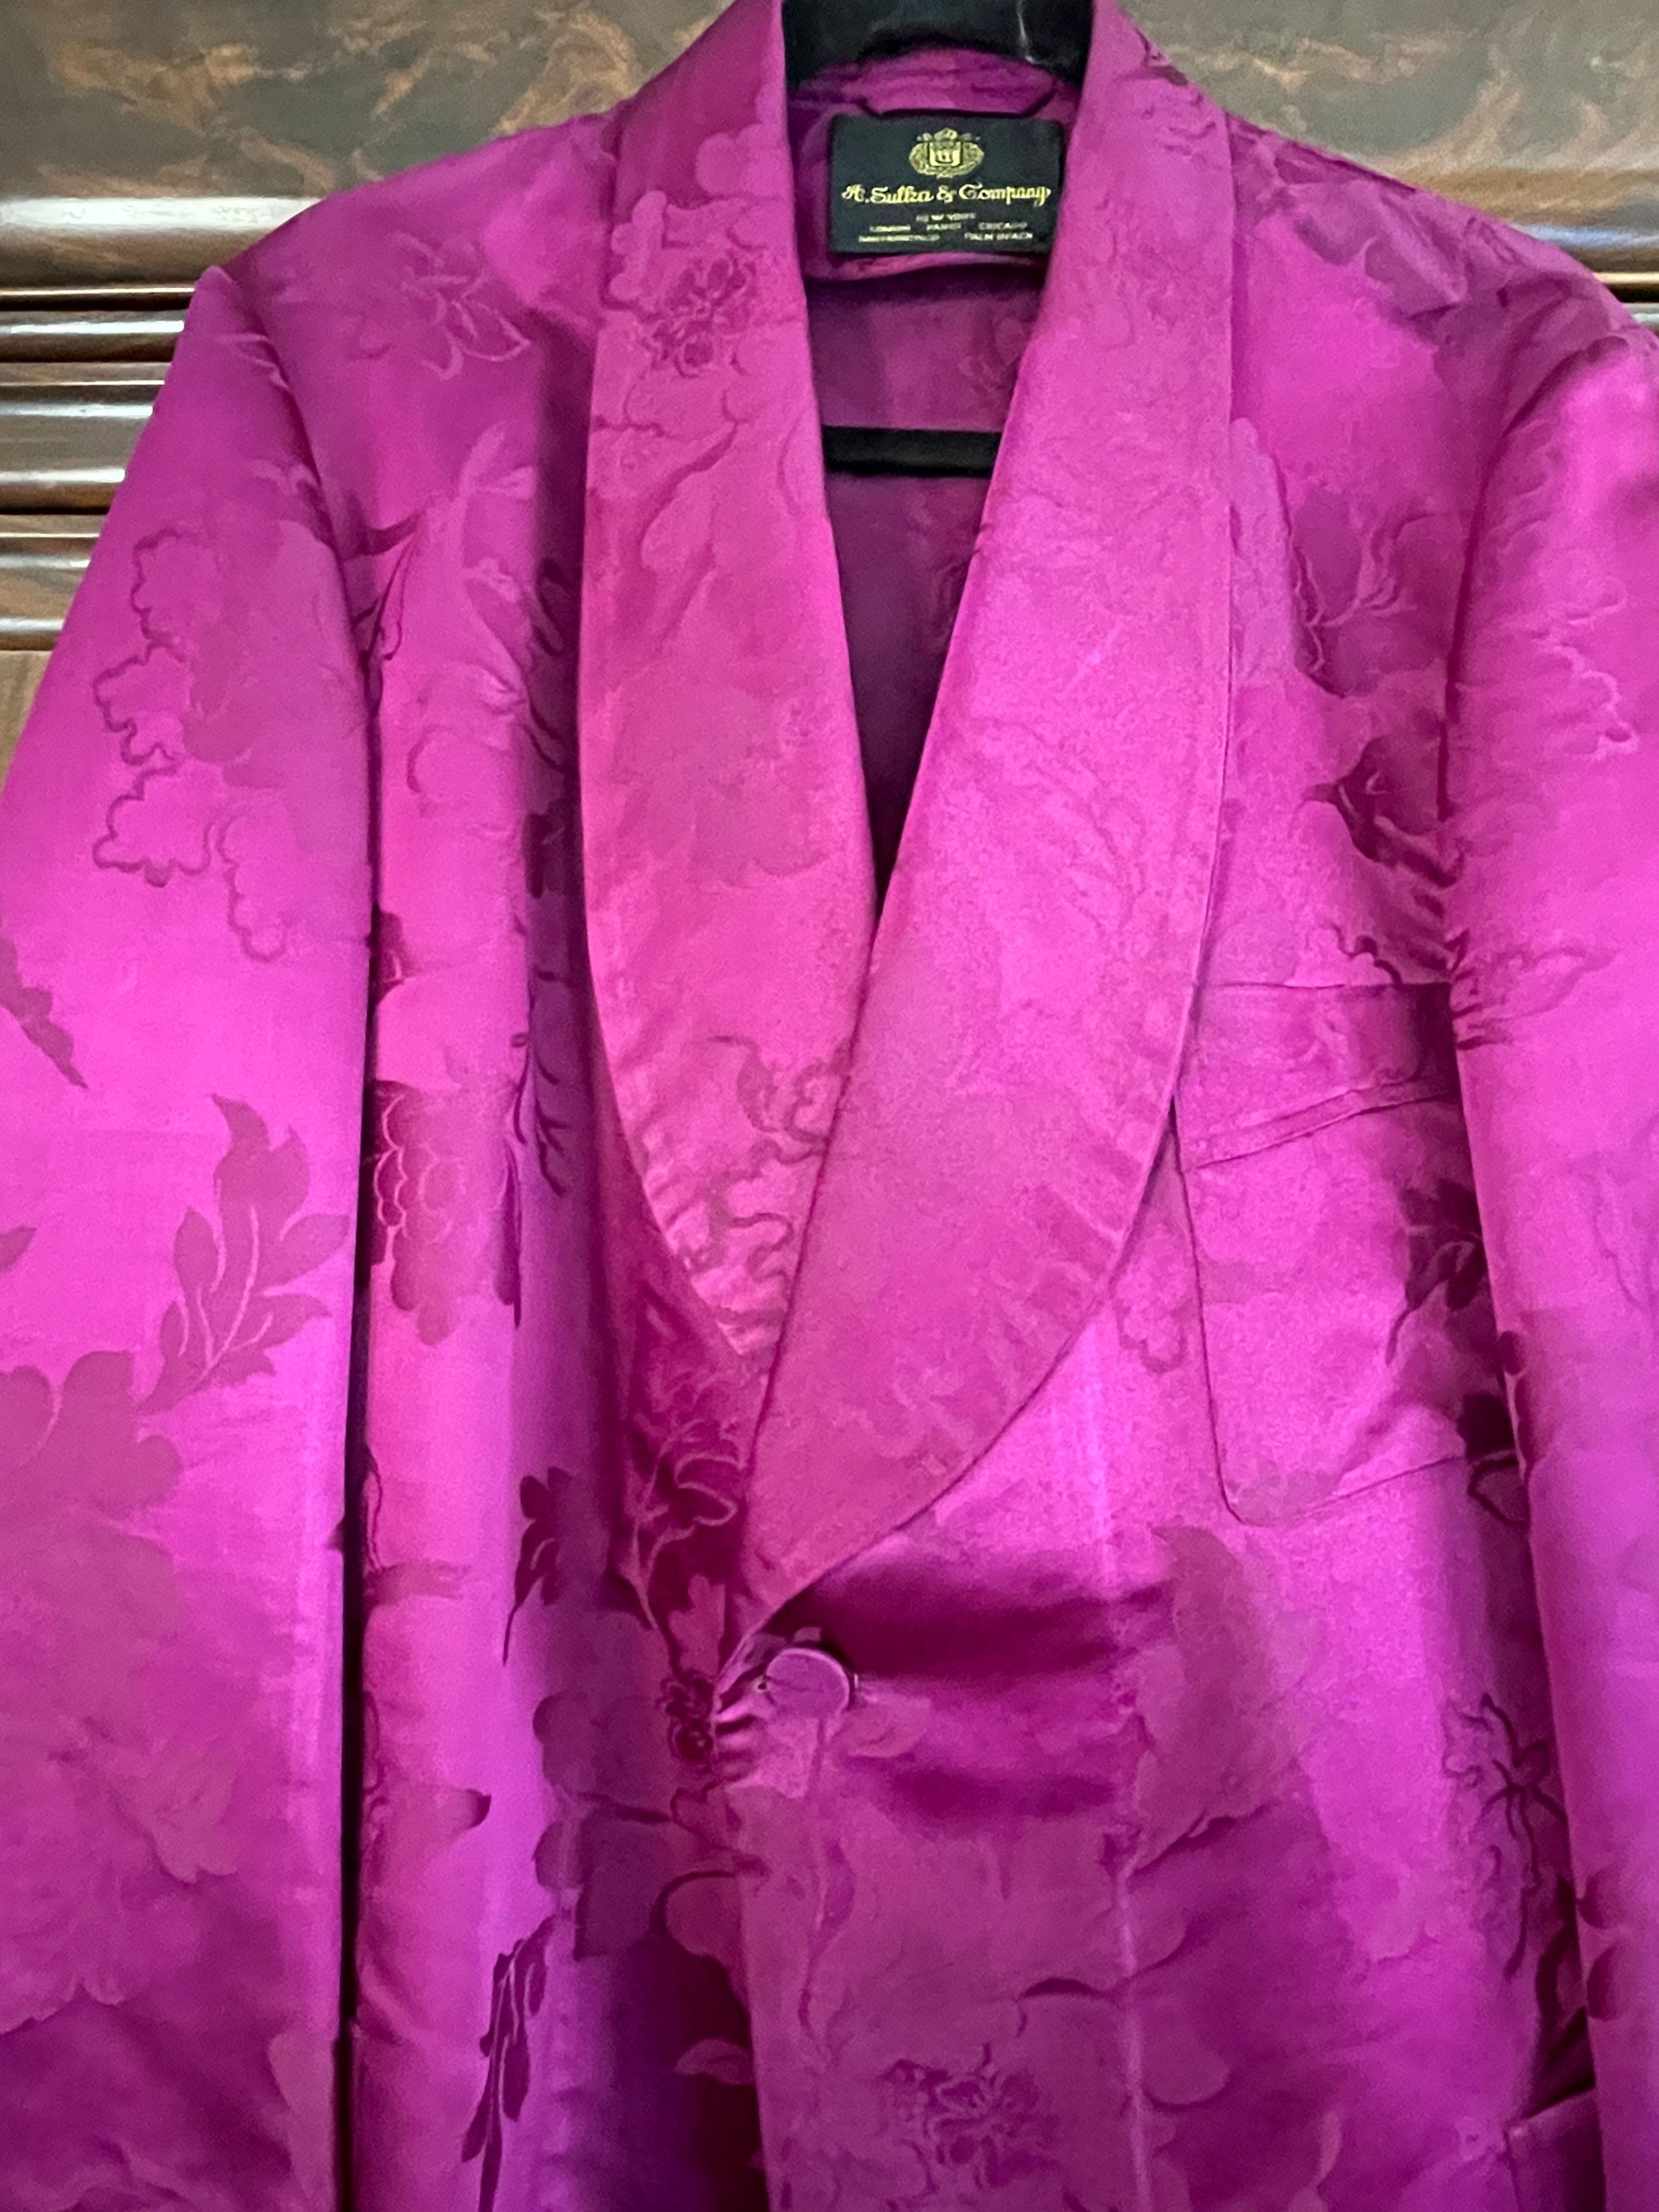 Sulka Unlined 1950's Bespoke Purple Silk Smoking Jacket .
This is such a magnificent piece, totally unlined ,  a very lightweight evening jacket.
So modern, hard to believe it is from the 1950's
Chest 44